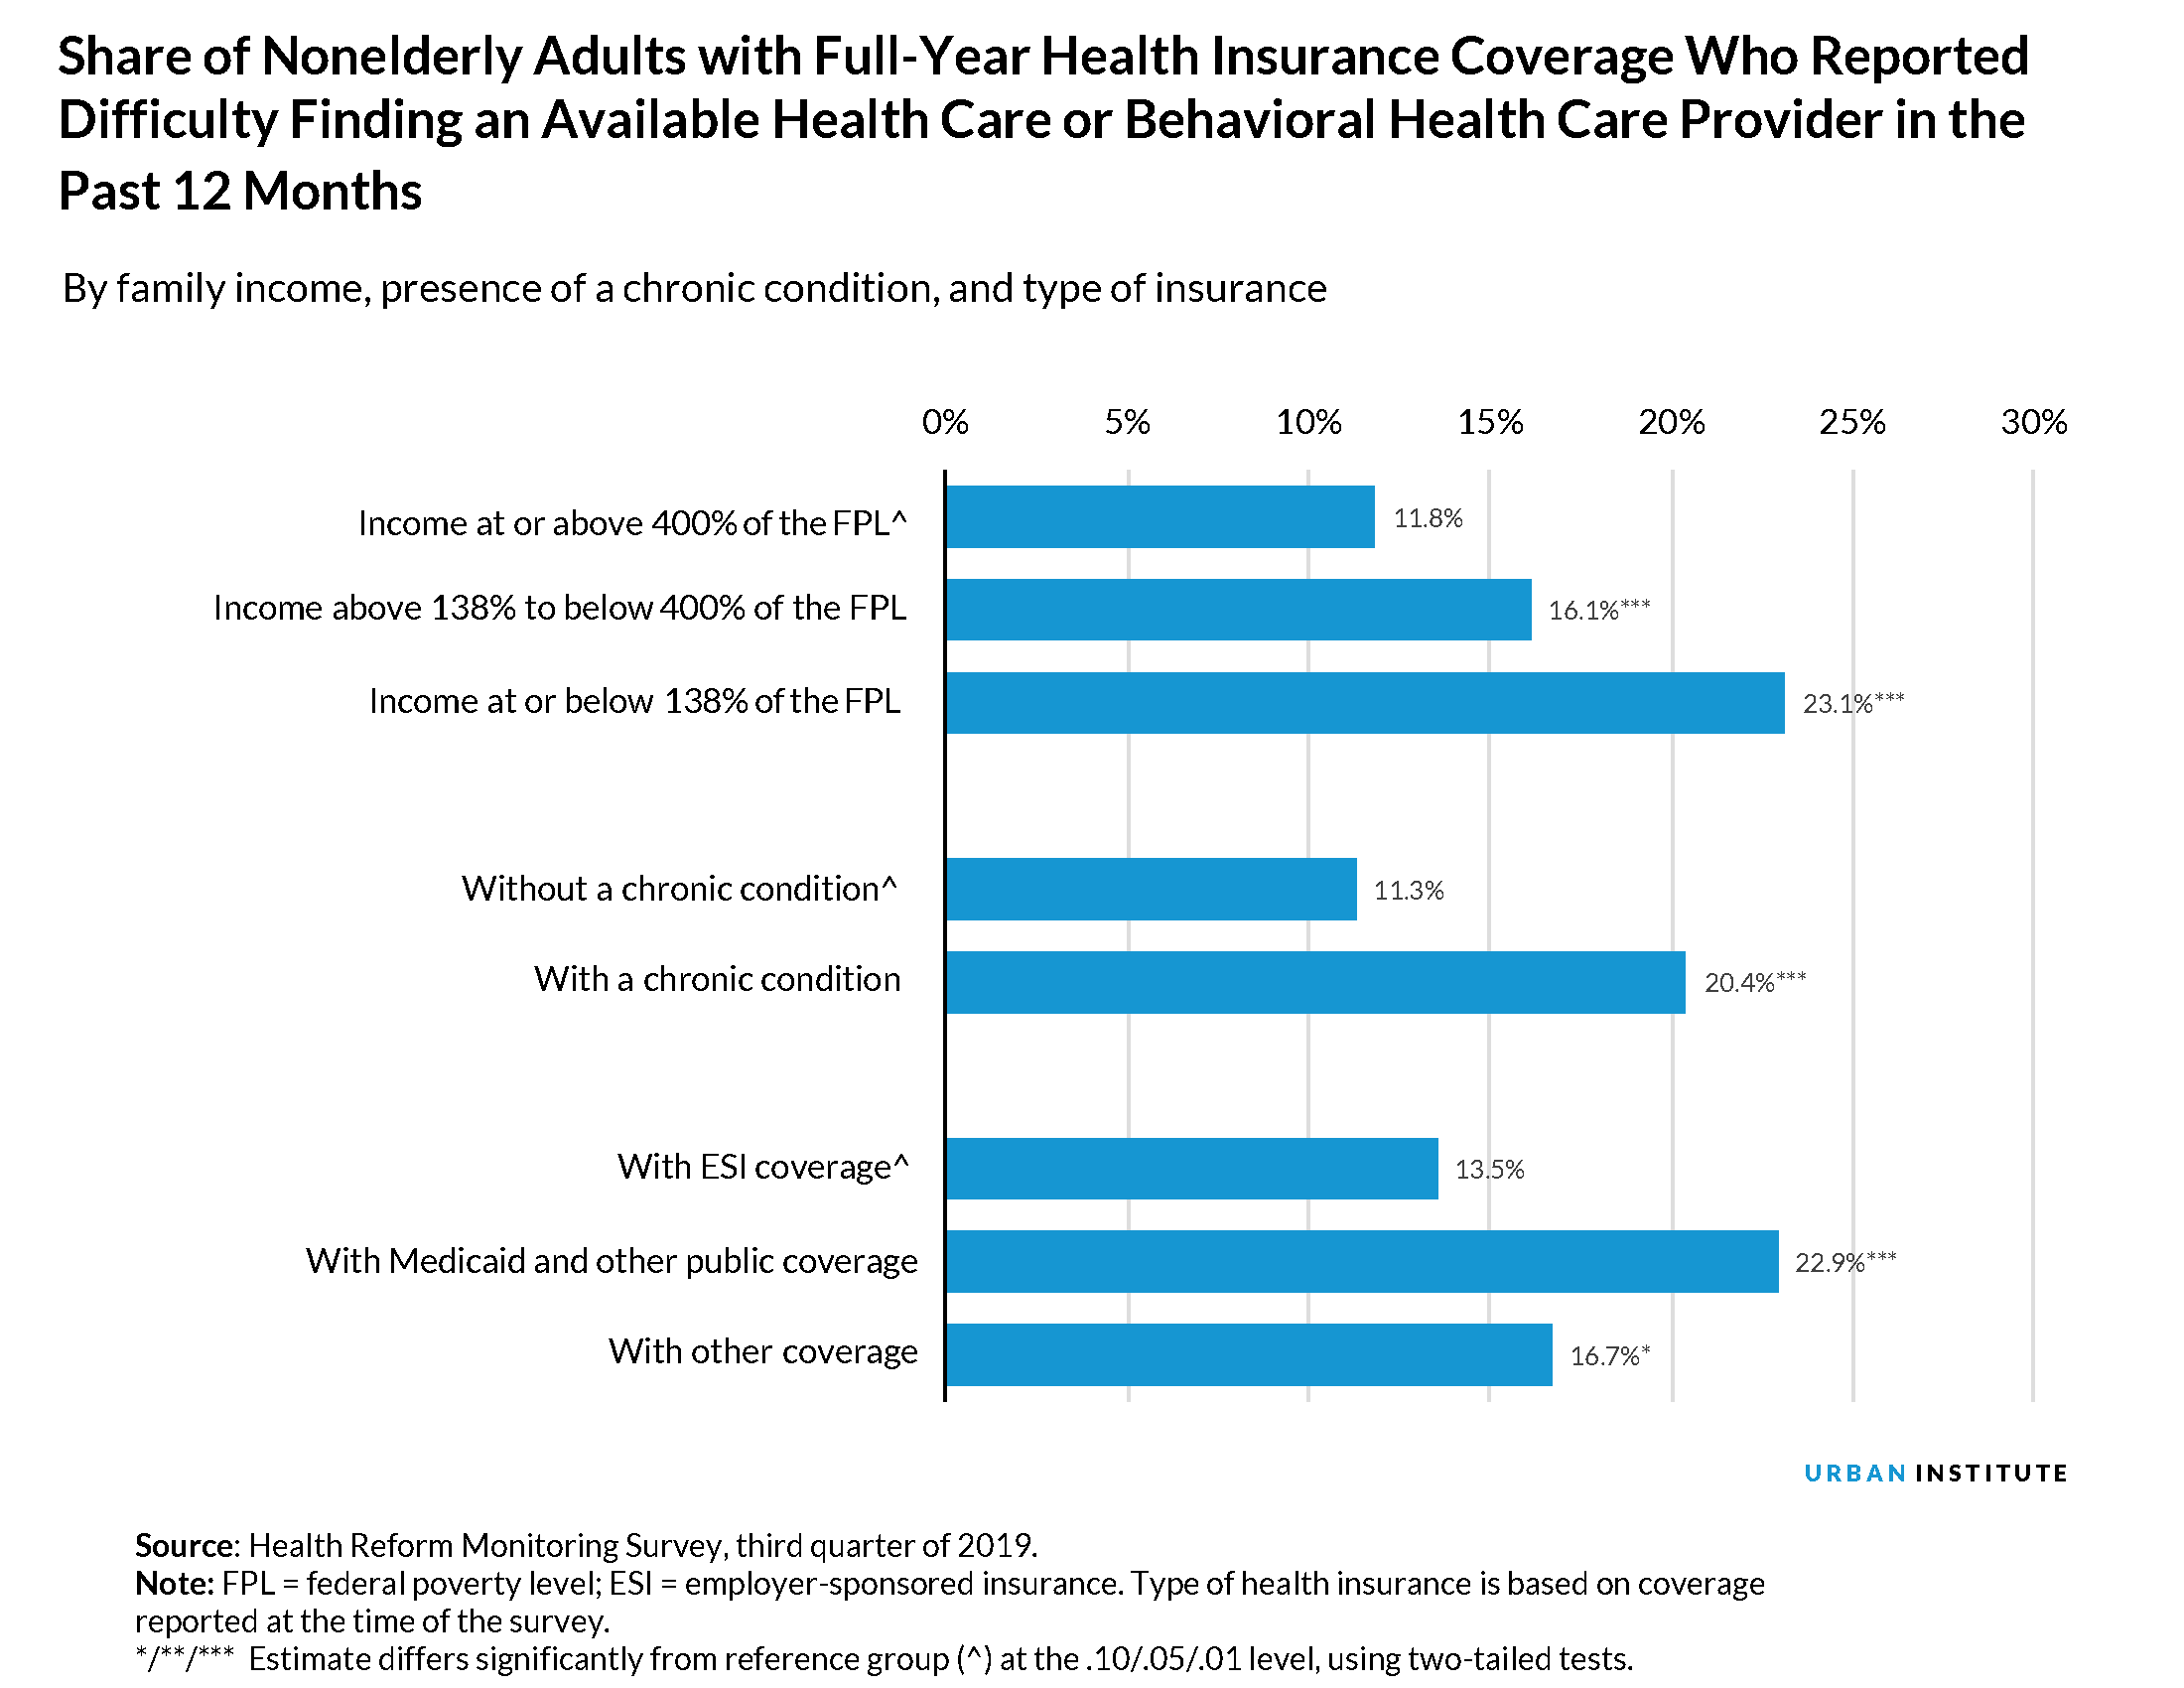 Share of adults who reported difficulty finding health care in past year